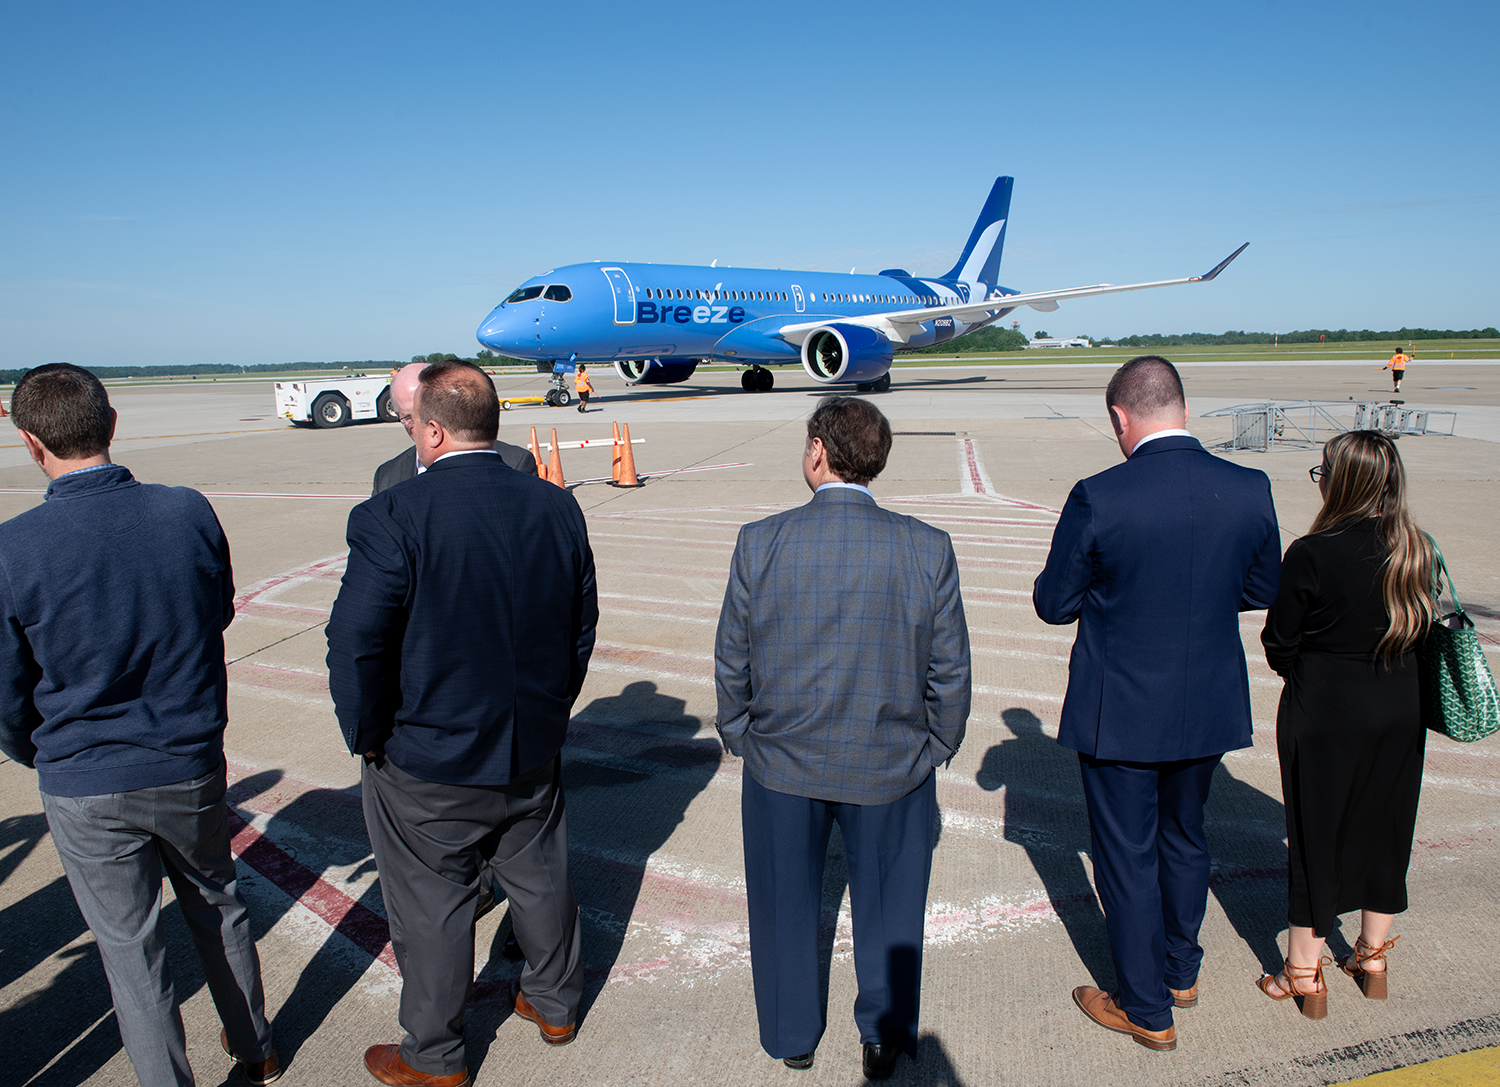 Get to Hollywood in a Breeze: 1st direct flight from Akron-Canton to Los Angeles takes off